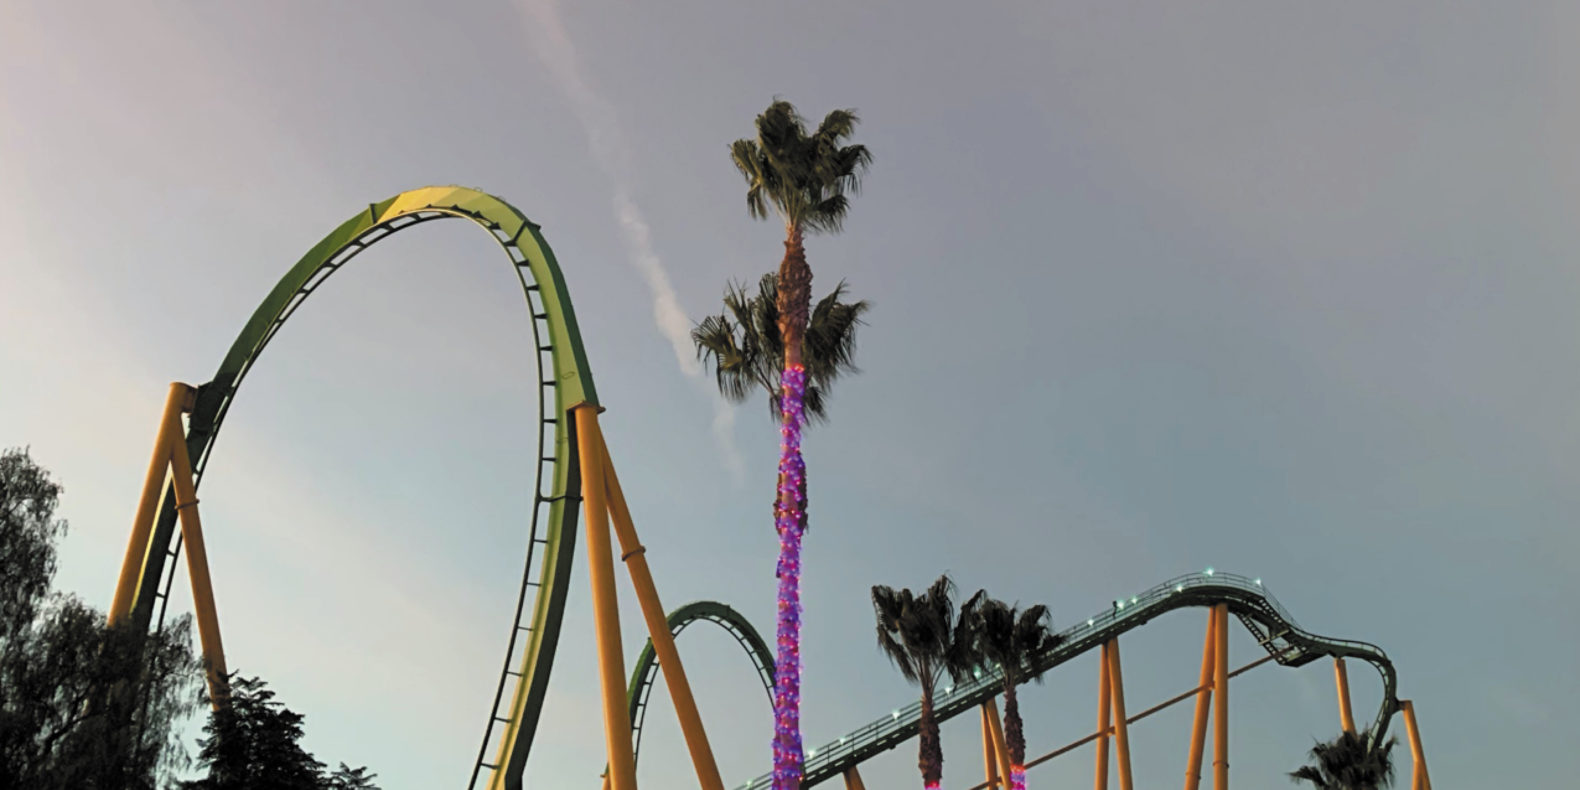 EJ Hill feature image, EJ Hill, joy study (pre-drop palms), 2019, view of roller coaster and palm tree against sky